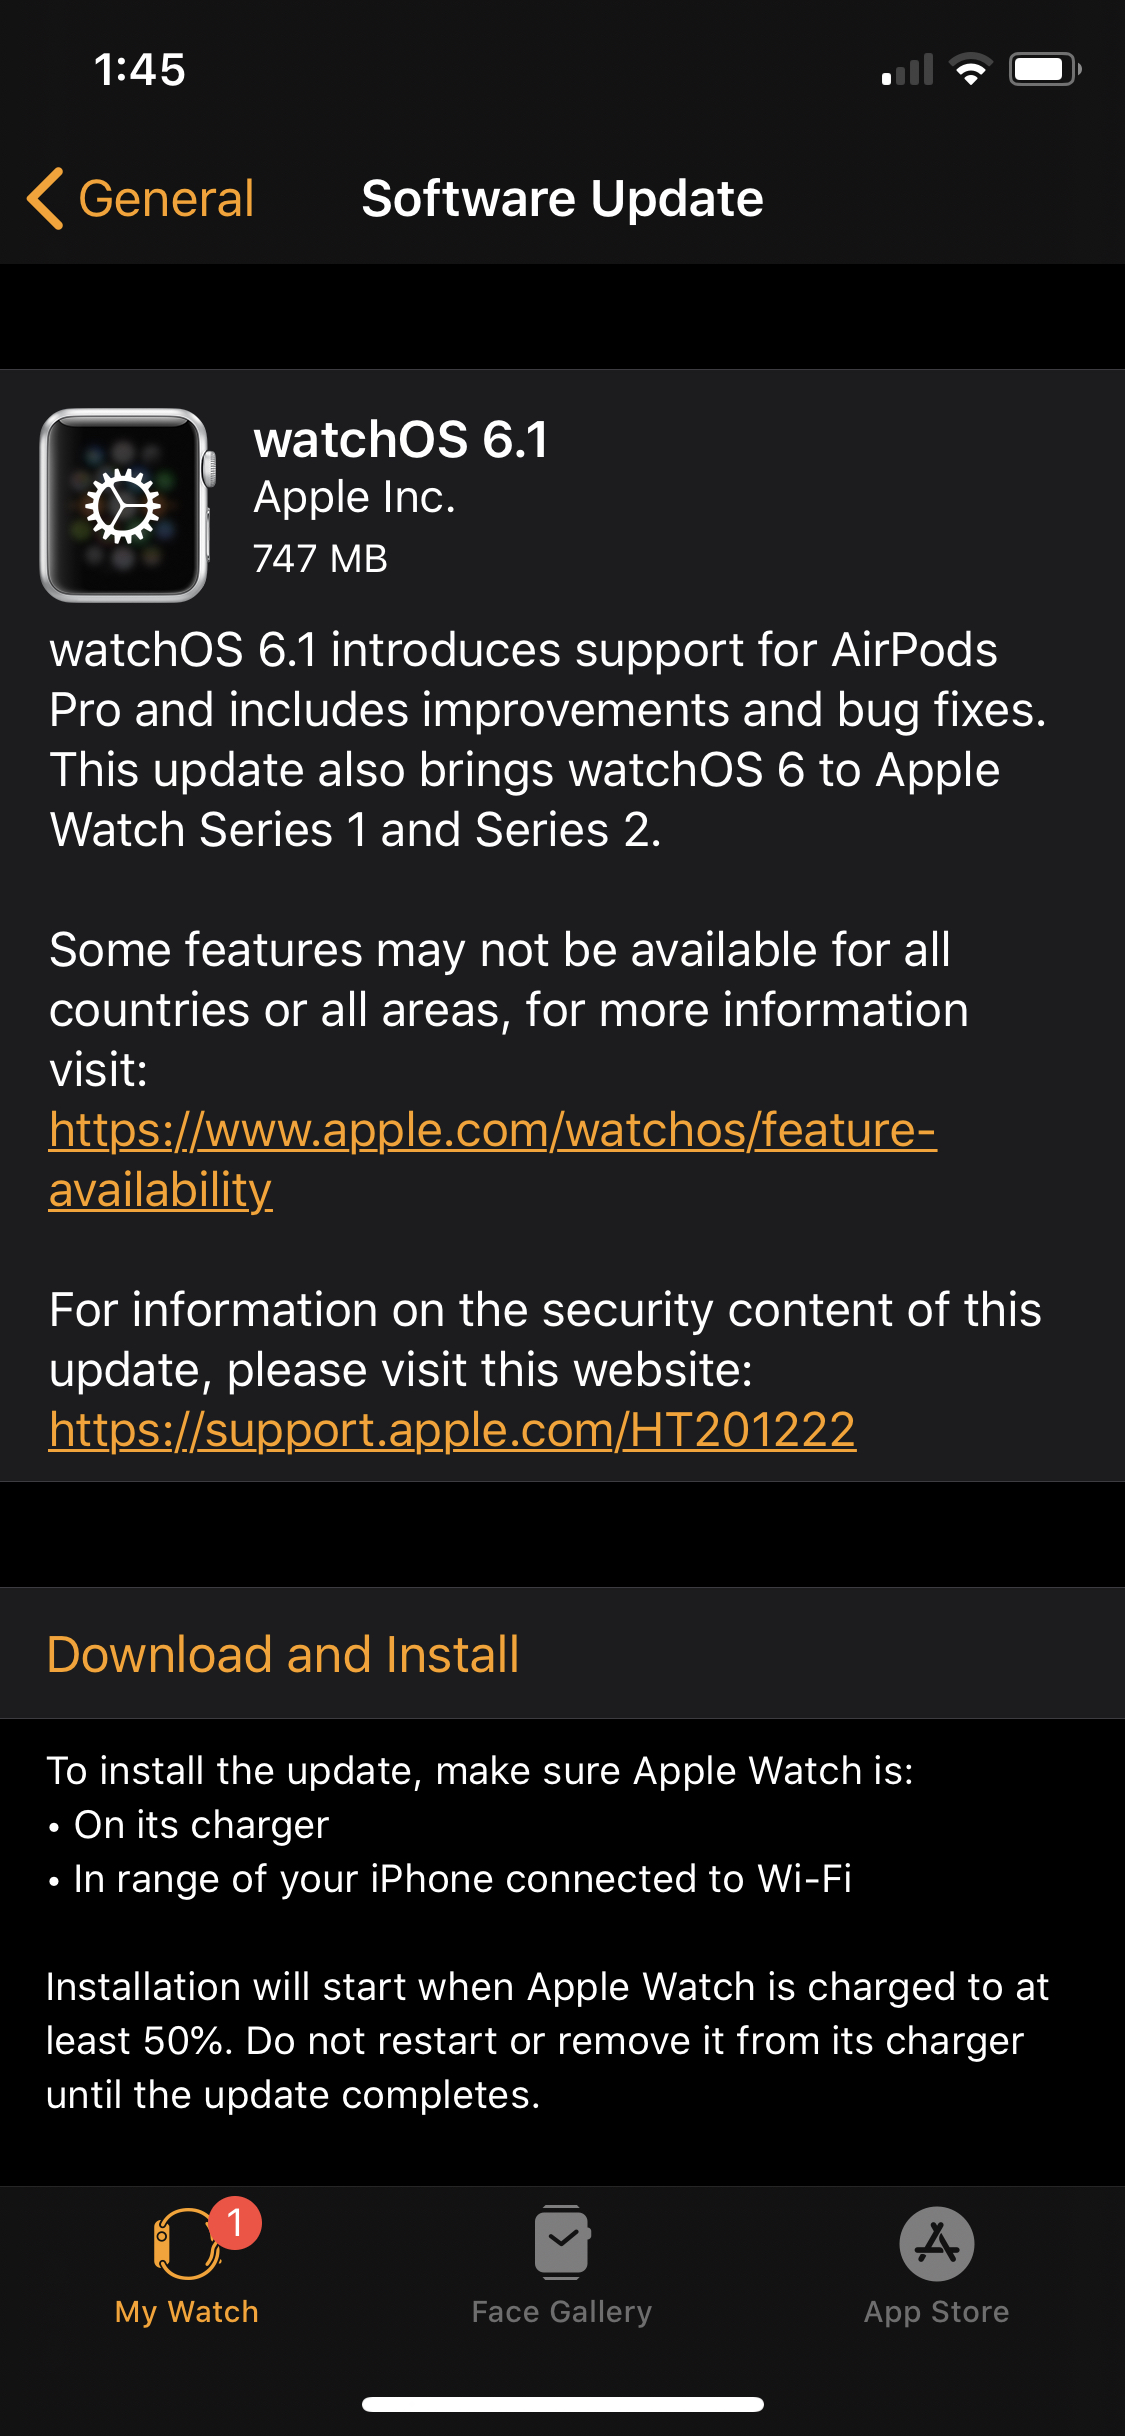 Apple Releases watchOS 6.1 With Support for Apple Watch Series 1 and 2, AirPods Pro